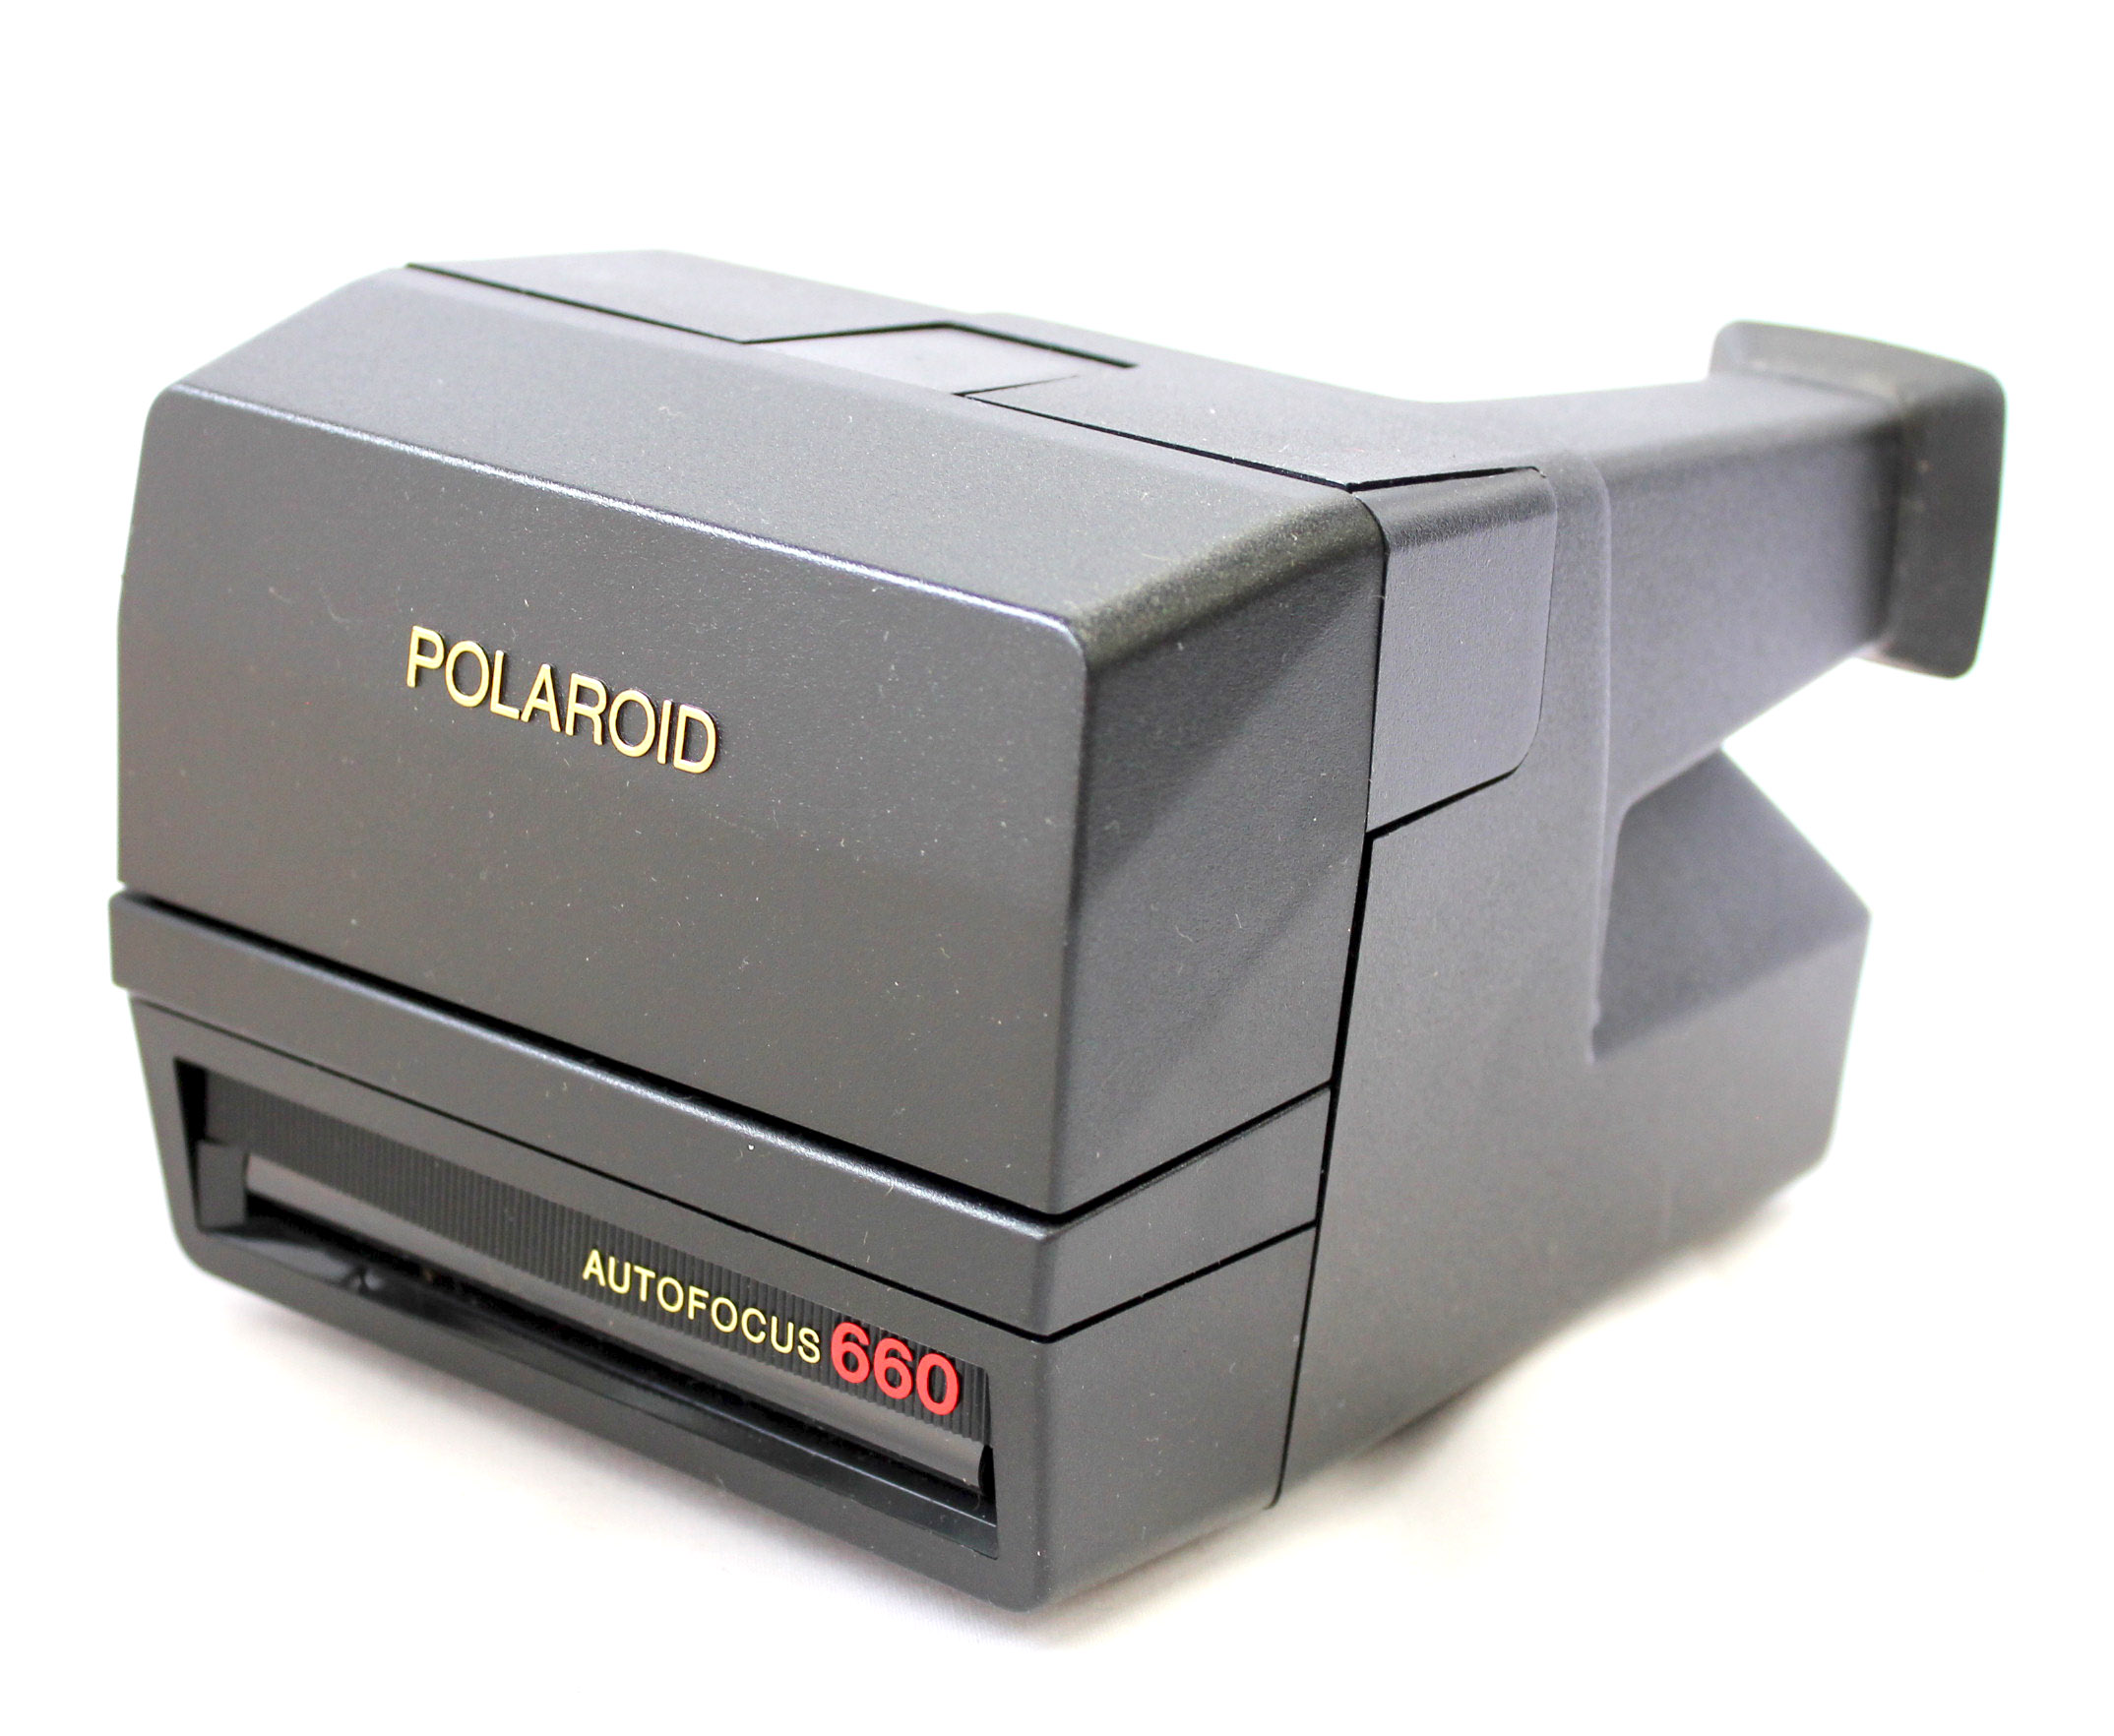  Polaroid Sun 660 AF Autofocus Instant Land Camera in Box from Japan Photo 5